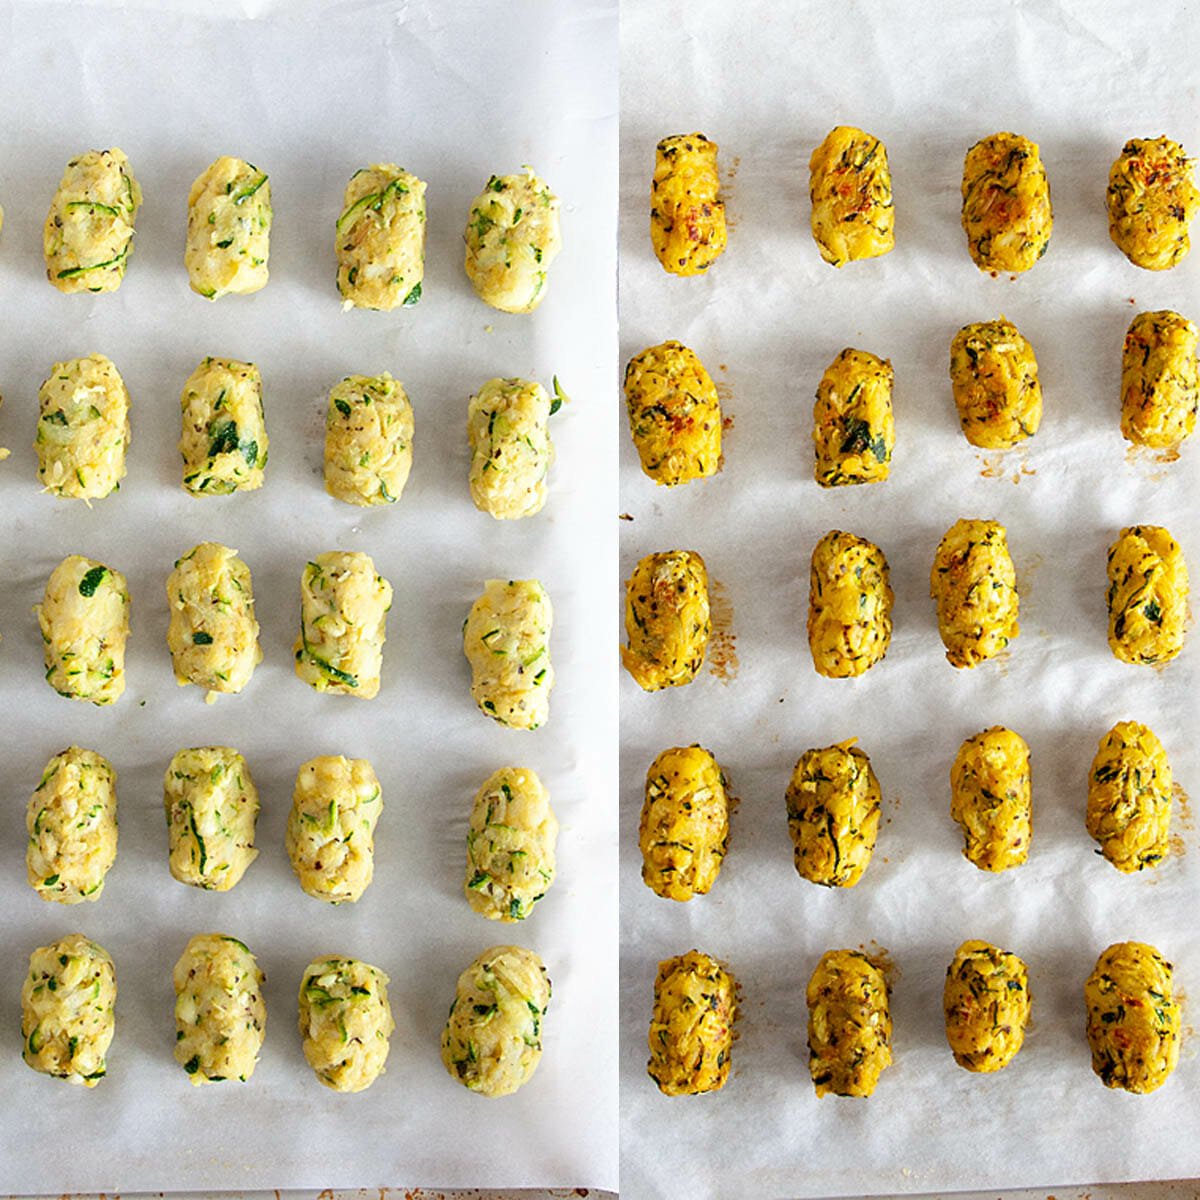 Zucchini Tots before and after baking on parchment lined baking sheet.